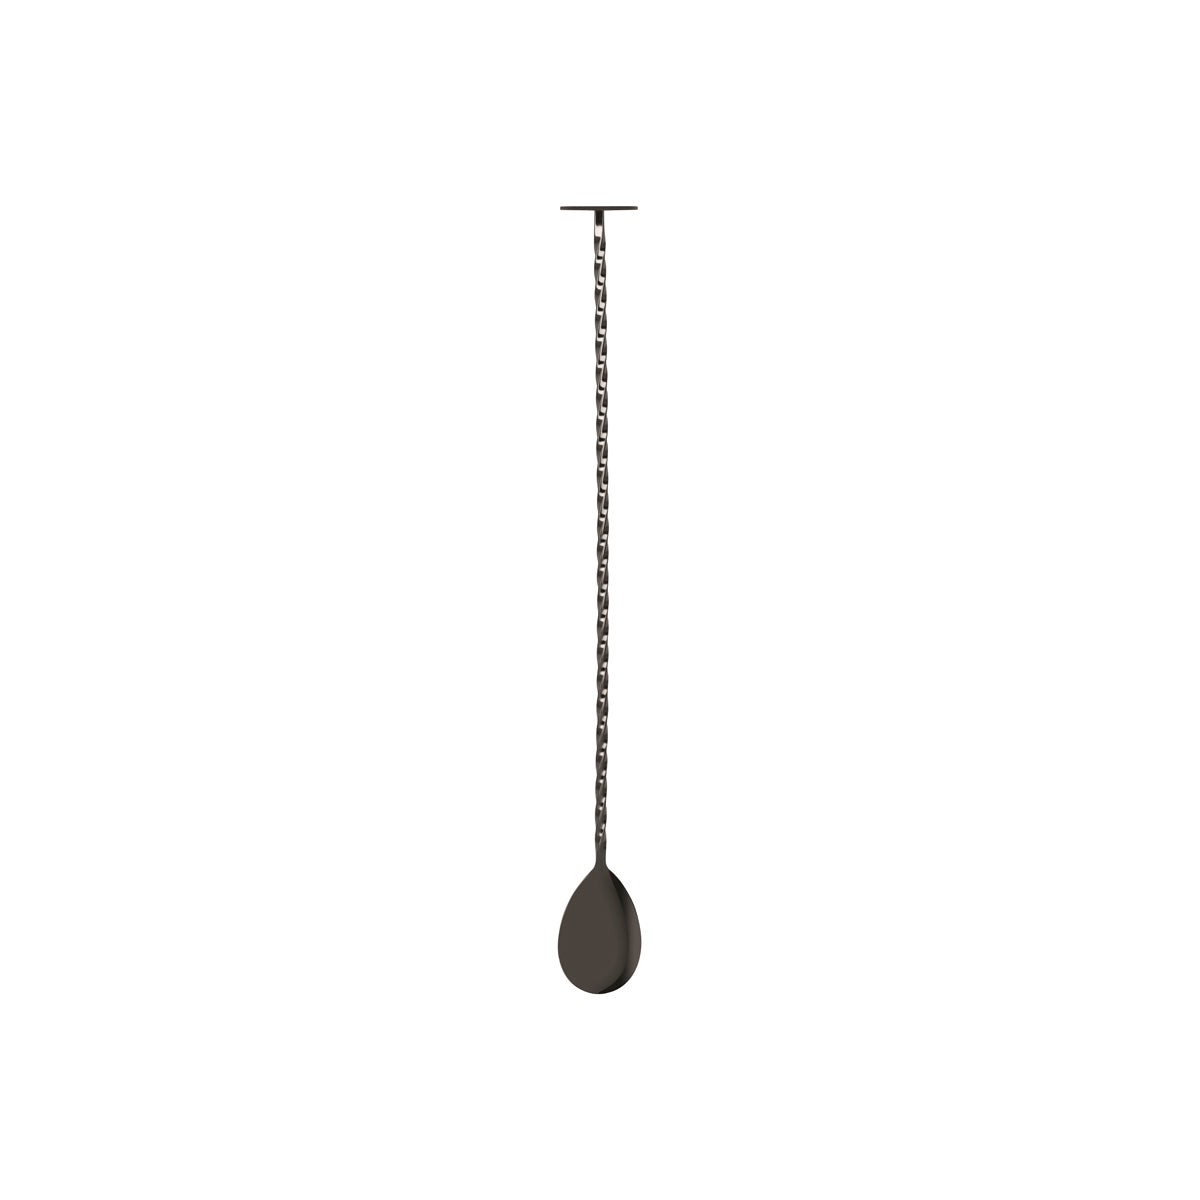 Tail Disk Bar Spoon - W/Muddler, Gun Metal from Zanzi. Packed in a gift box and sold in boxes of 1. Hospitality quality at wholesale price with The Flying Fork! 